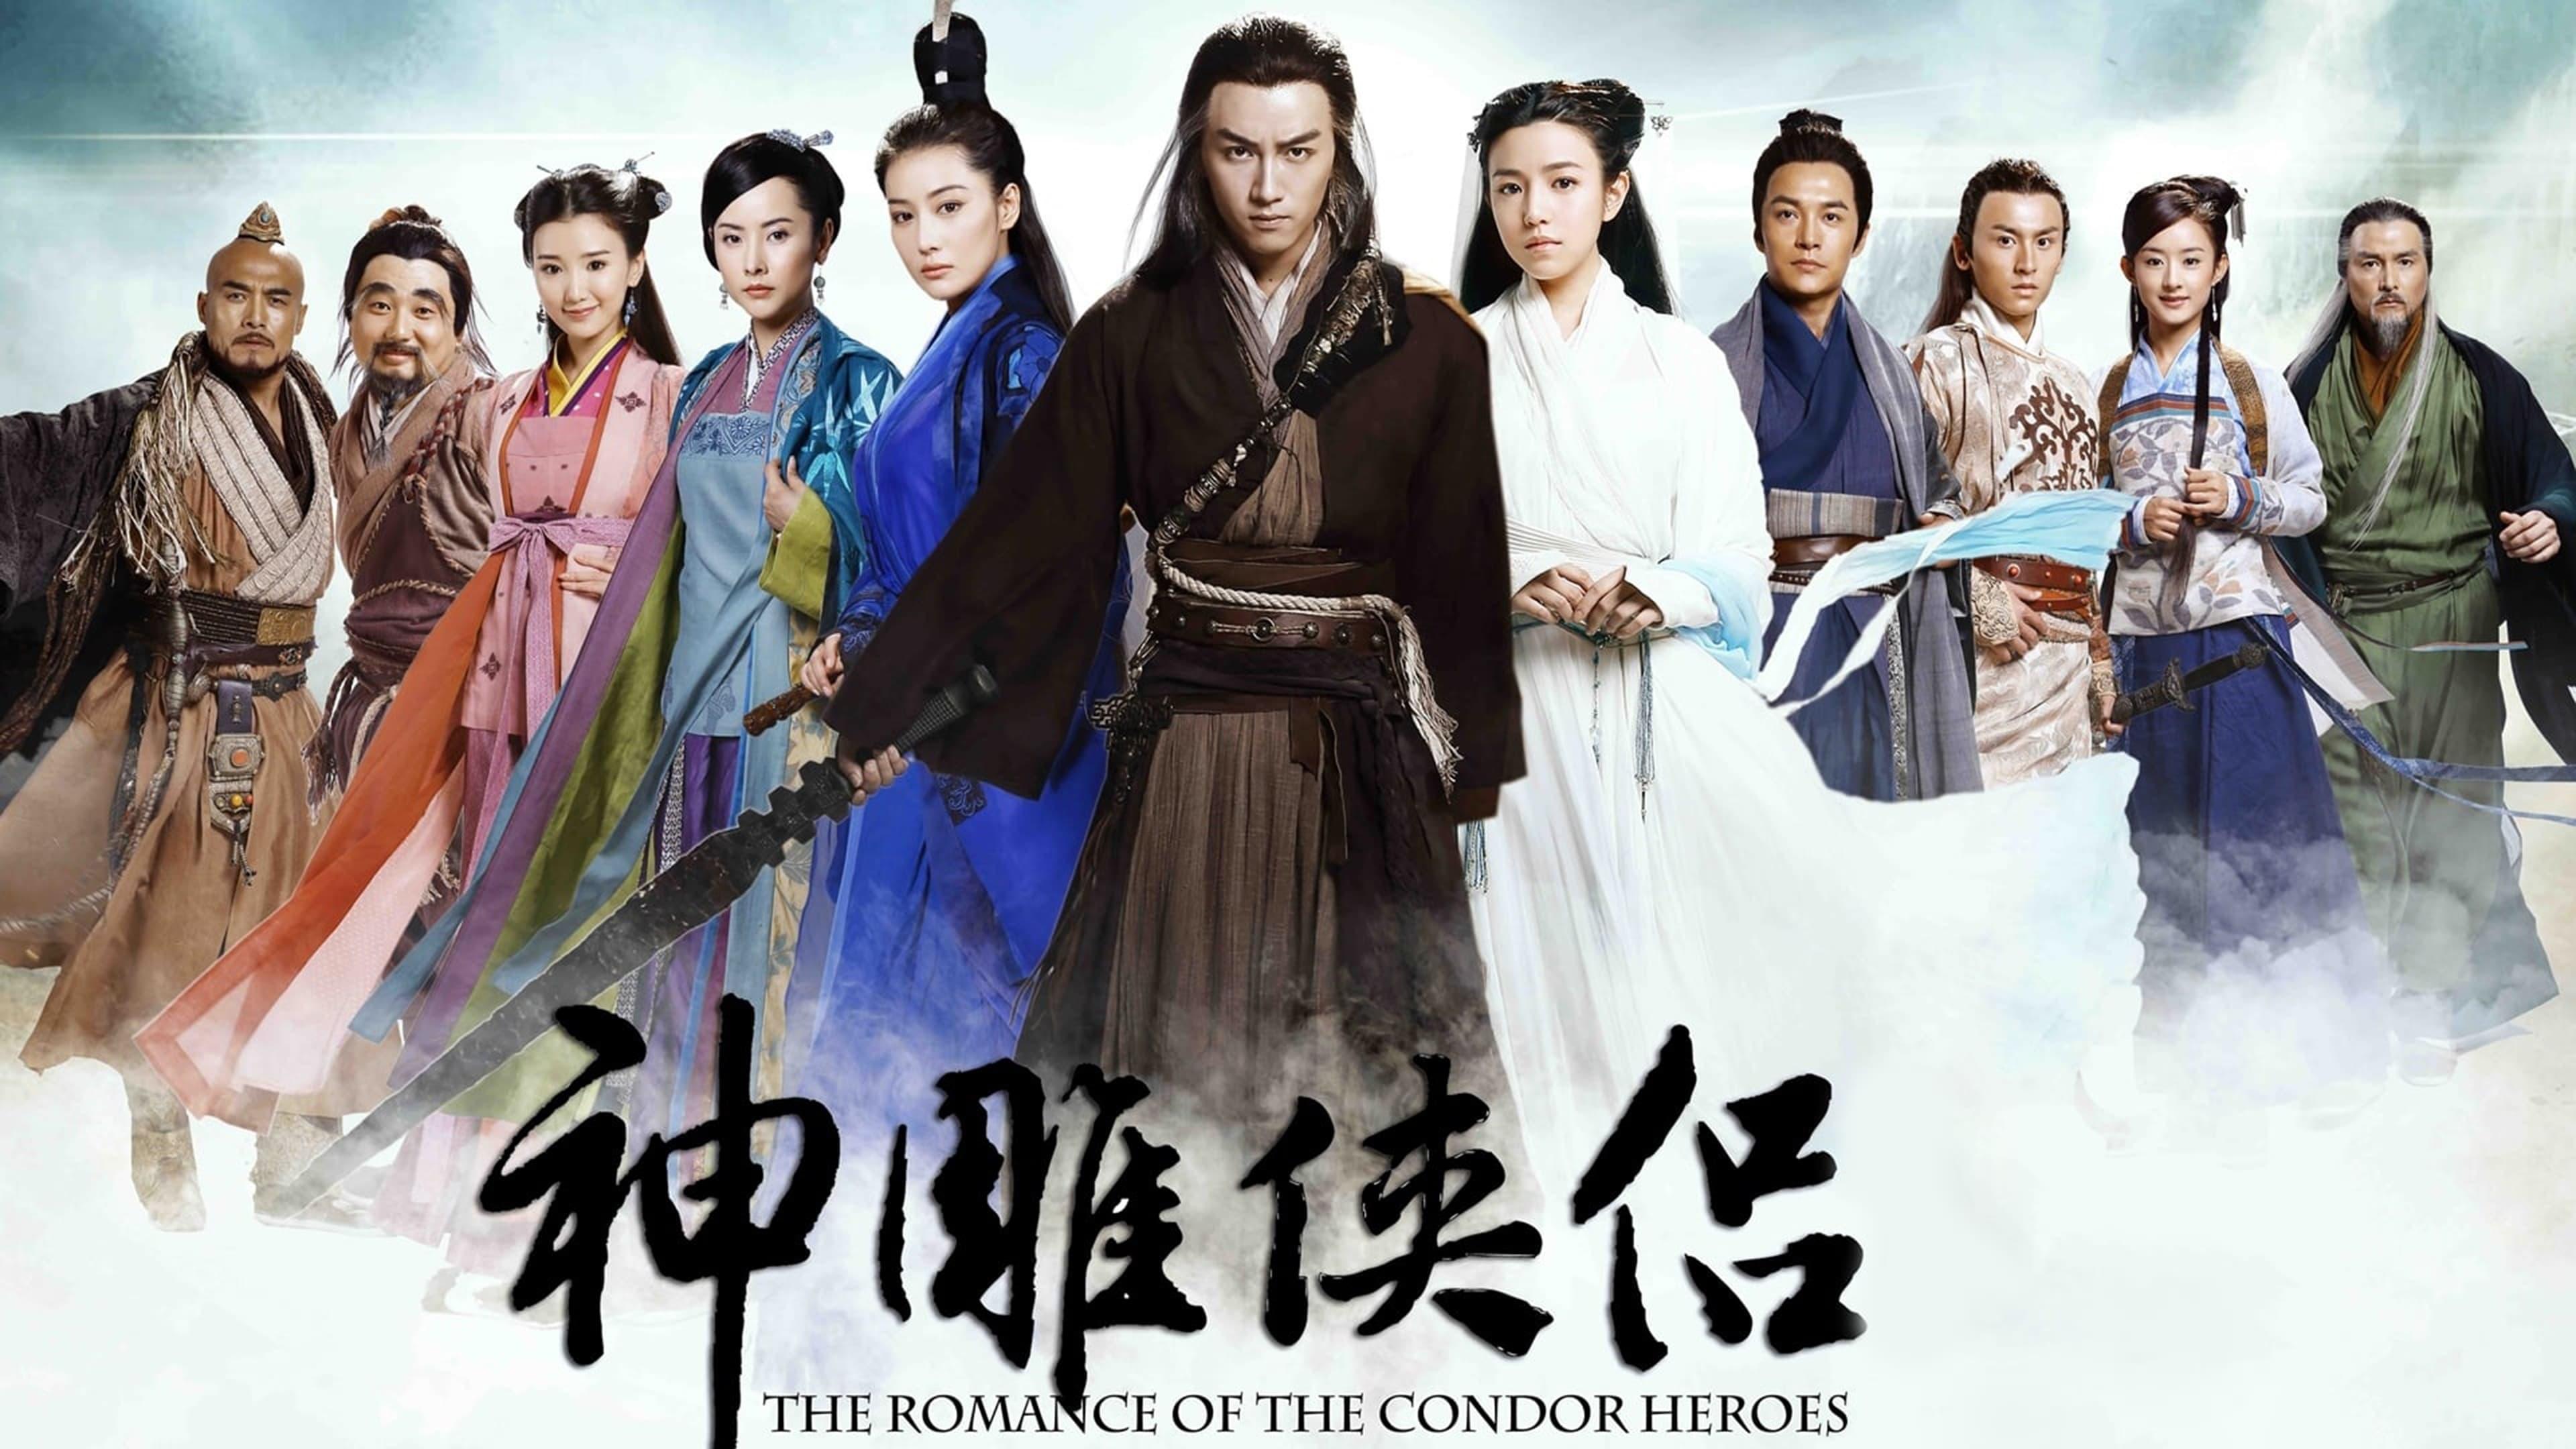 The Romance of the Condor Heroes backdrop